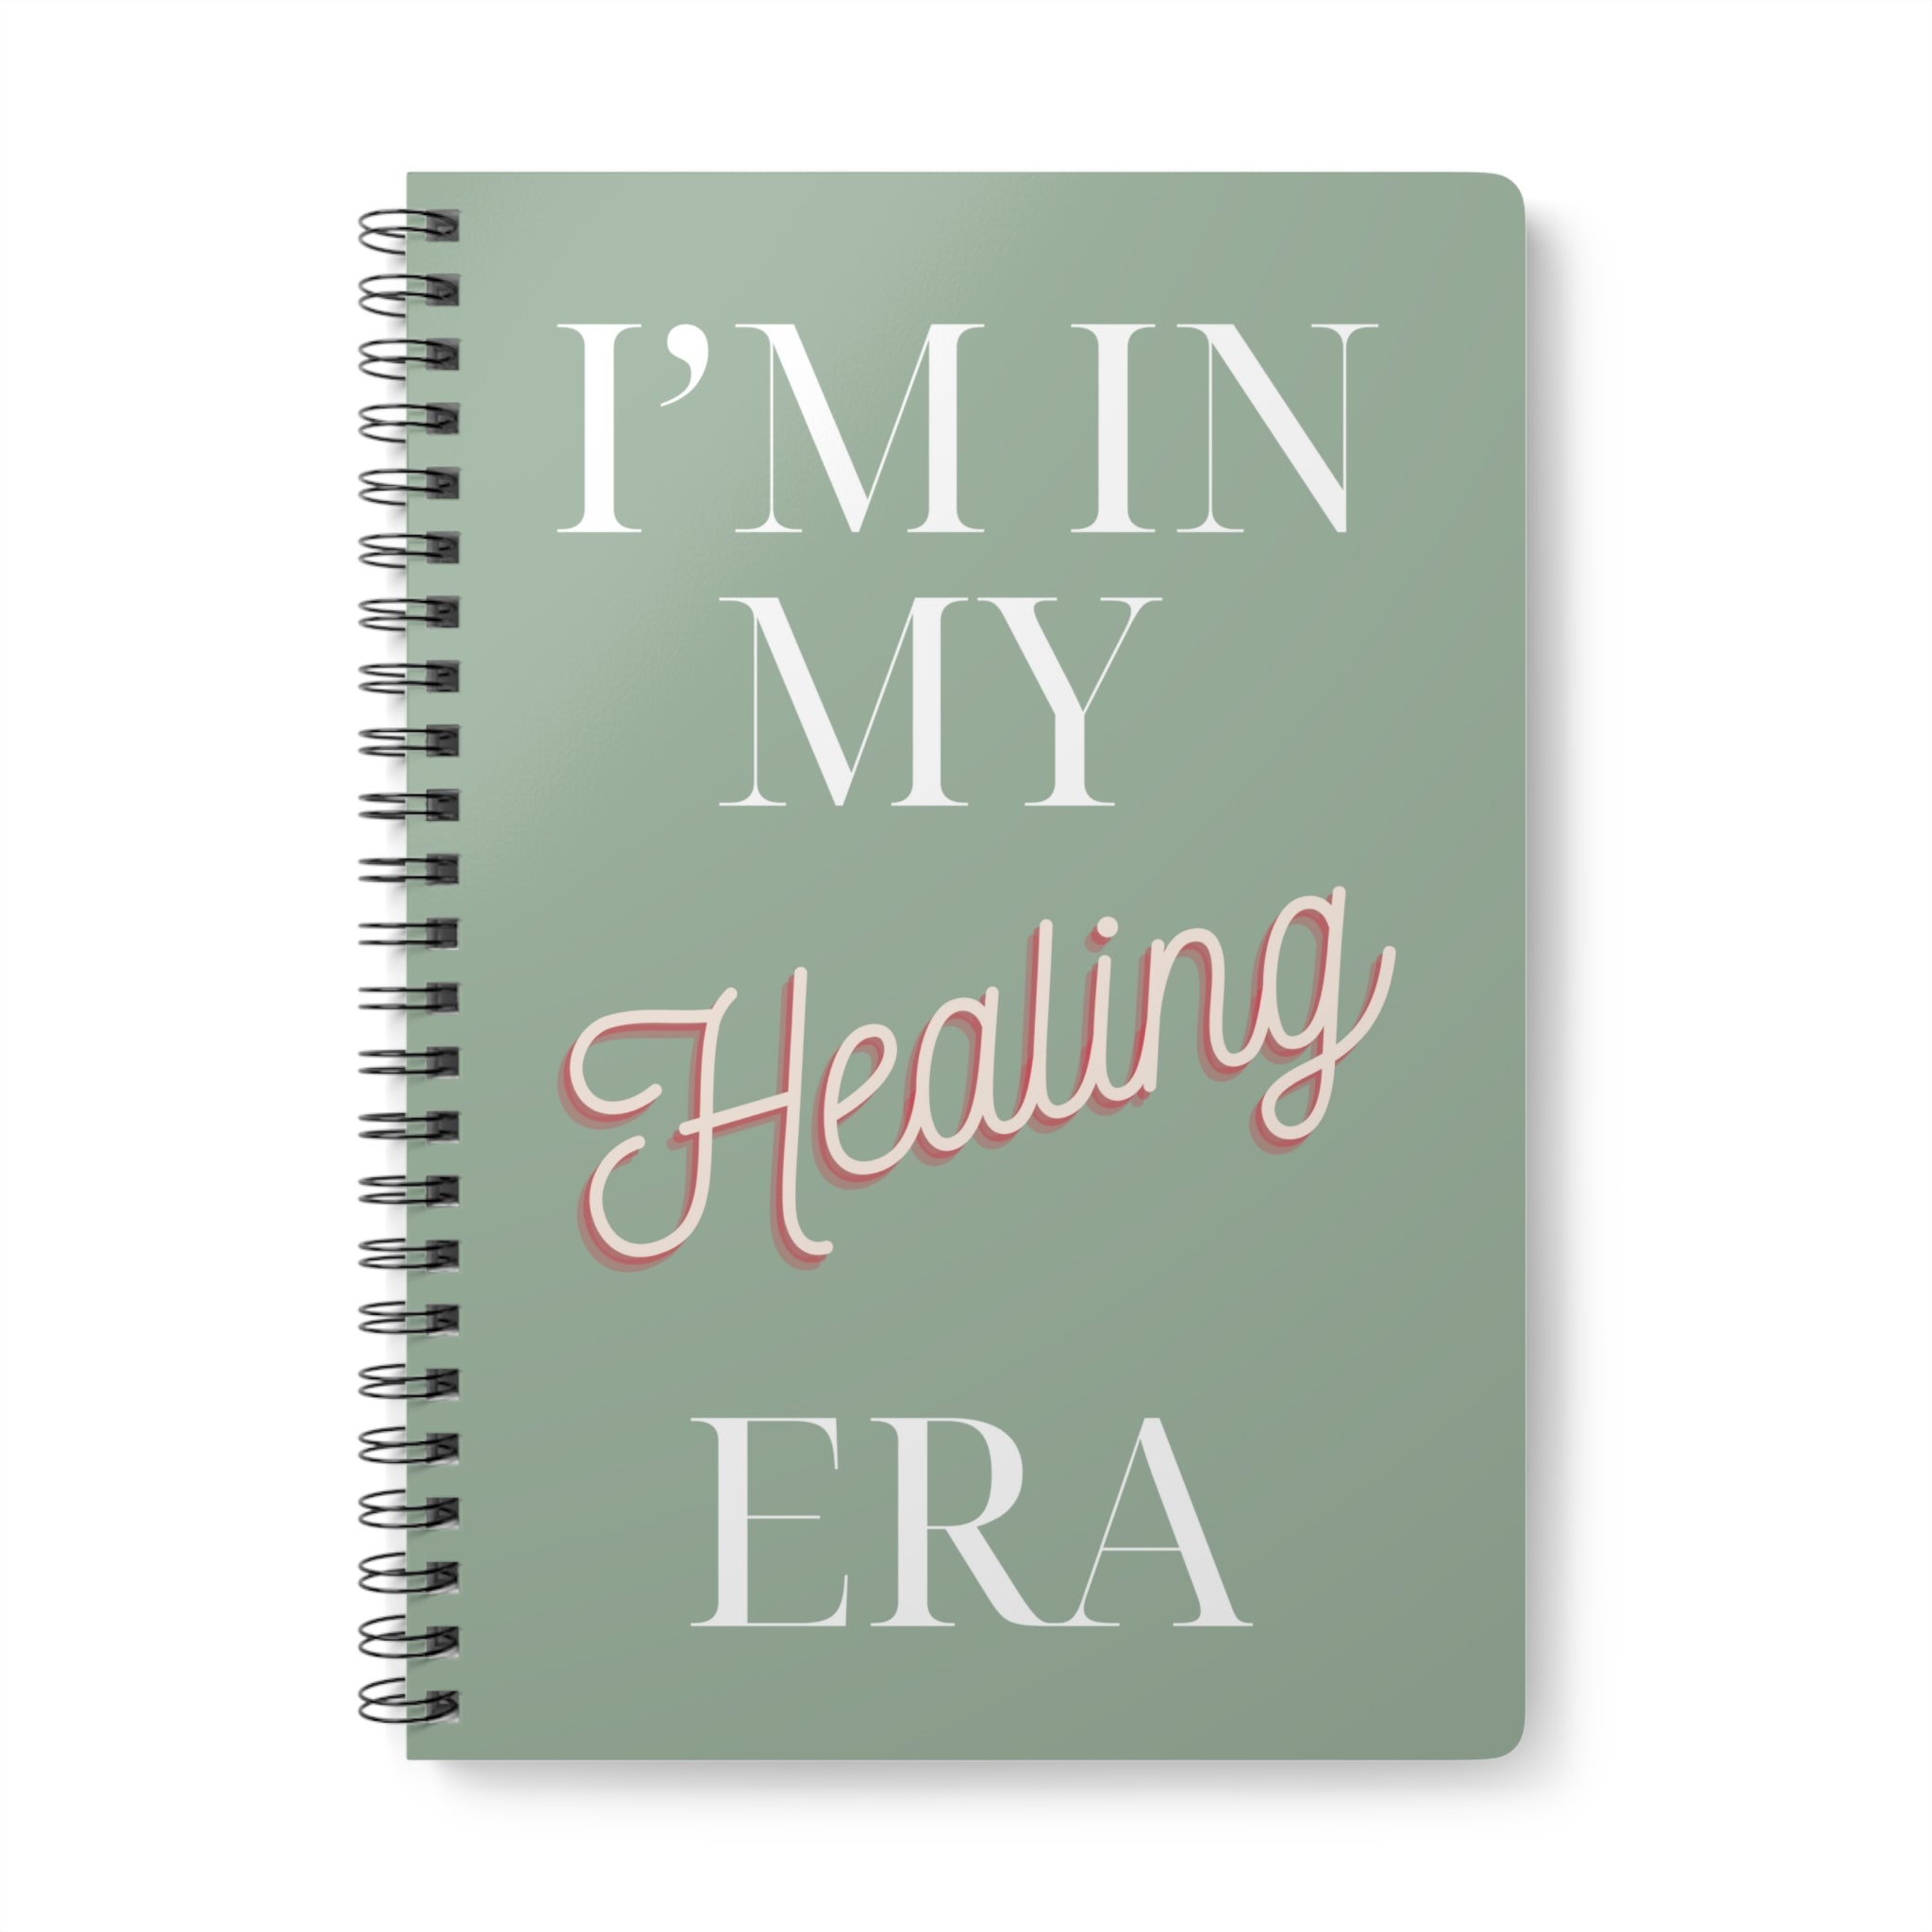 "I'm in my Headling Era" Wirobound Softcover Notebook, A5, 150 pages